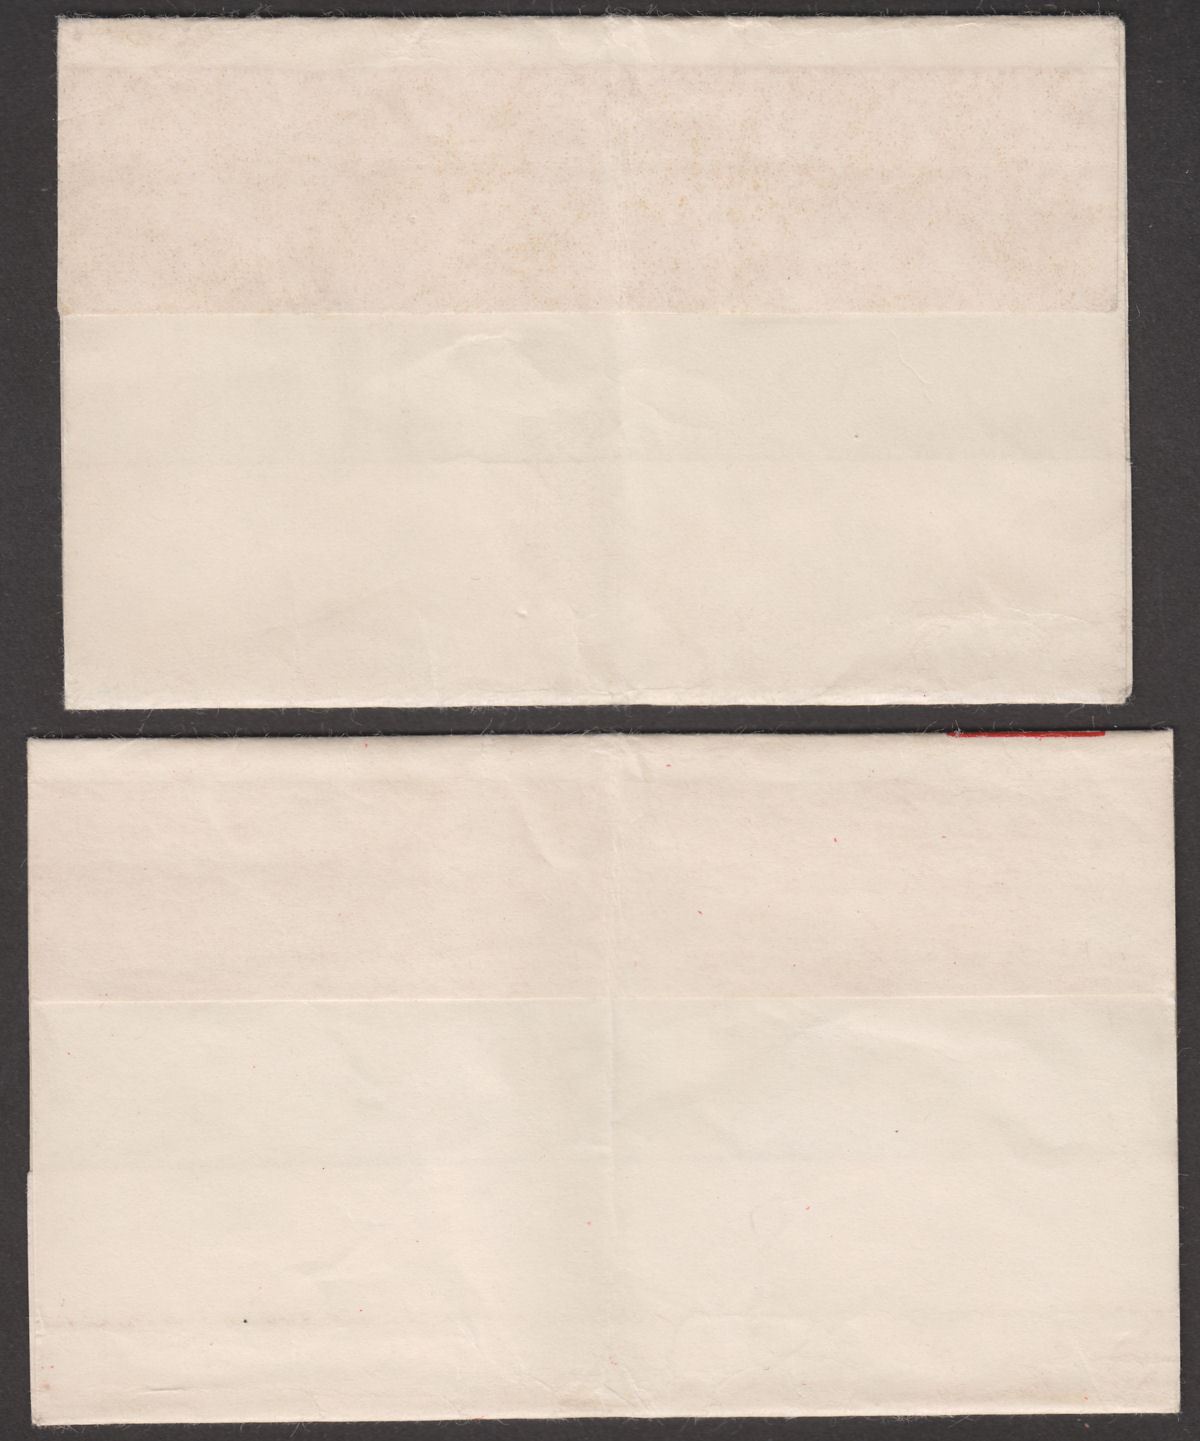 New Zealand QEII Postal Stationery Newspaper Wrappers Mostly Used